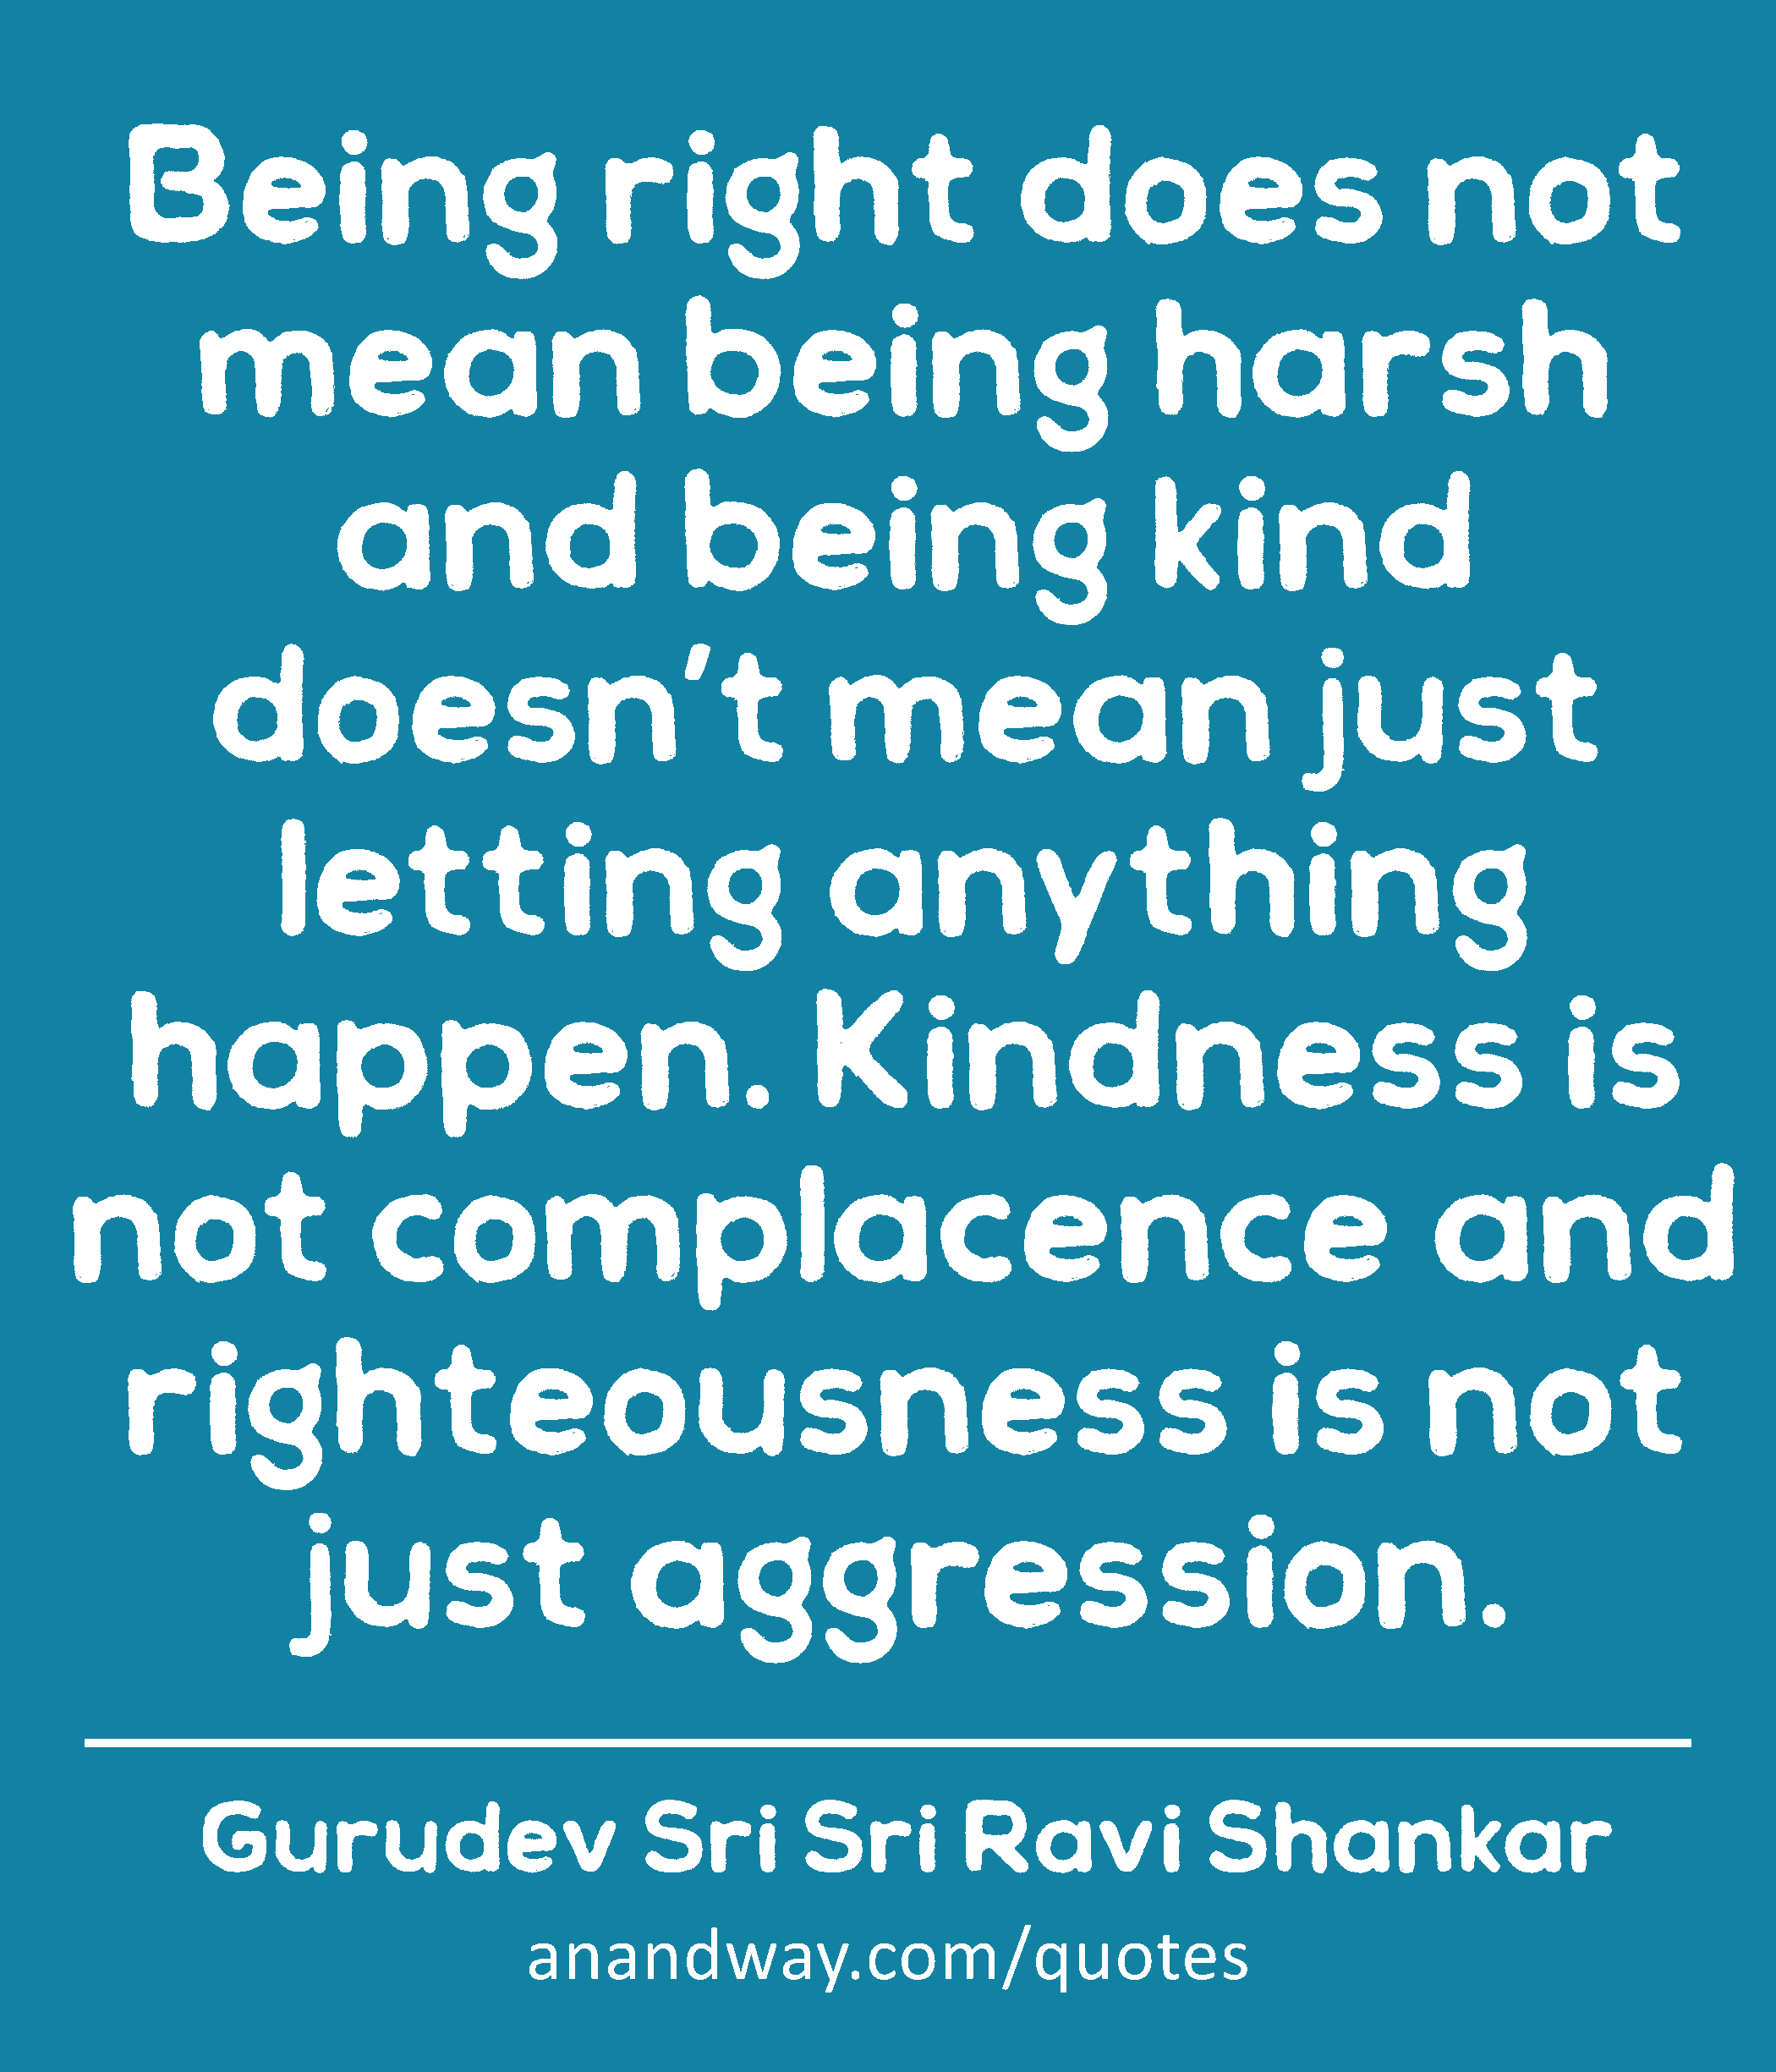 Being right does not mean being harsh and being kind doesn’t mean just letting anything happen.
 -Gurudev Sri Sri Ravi Shankar